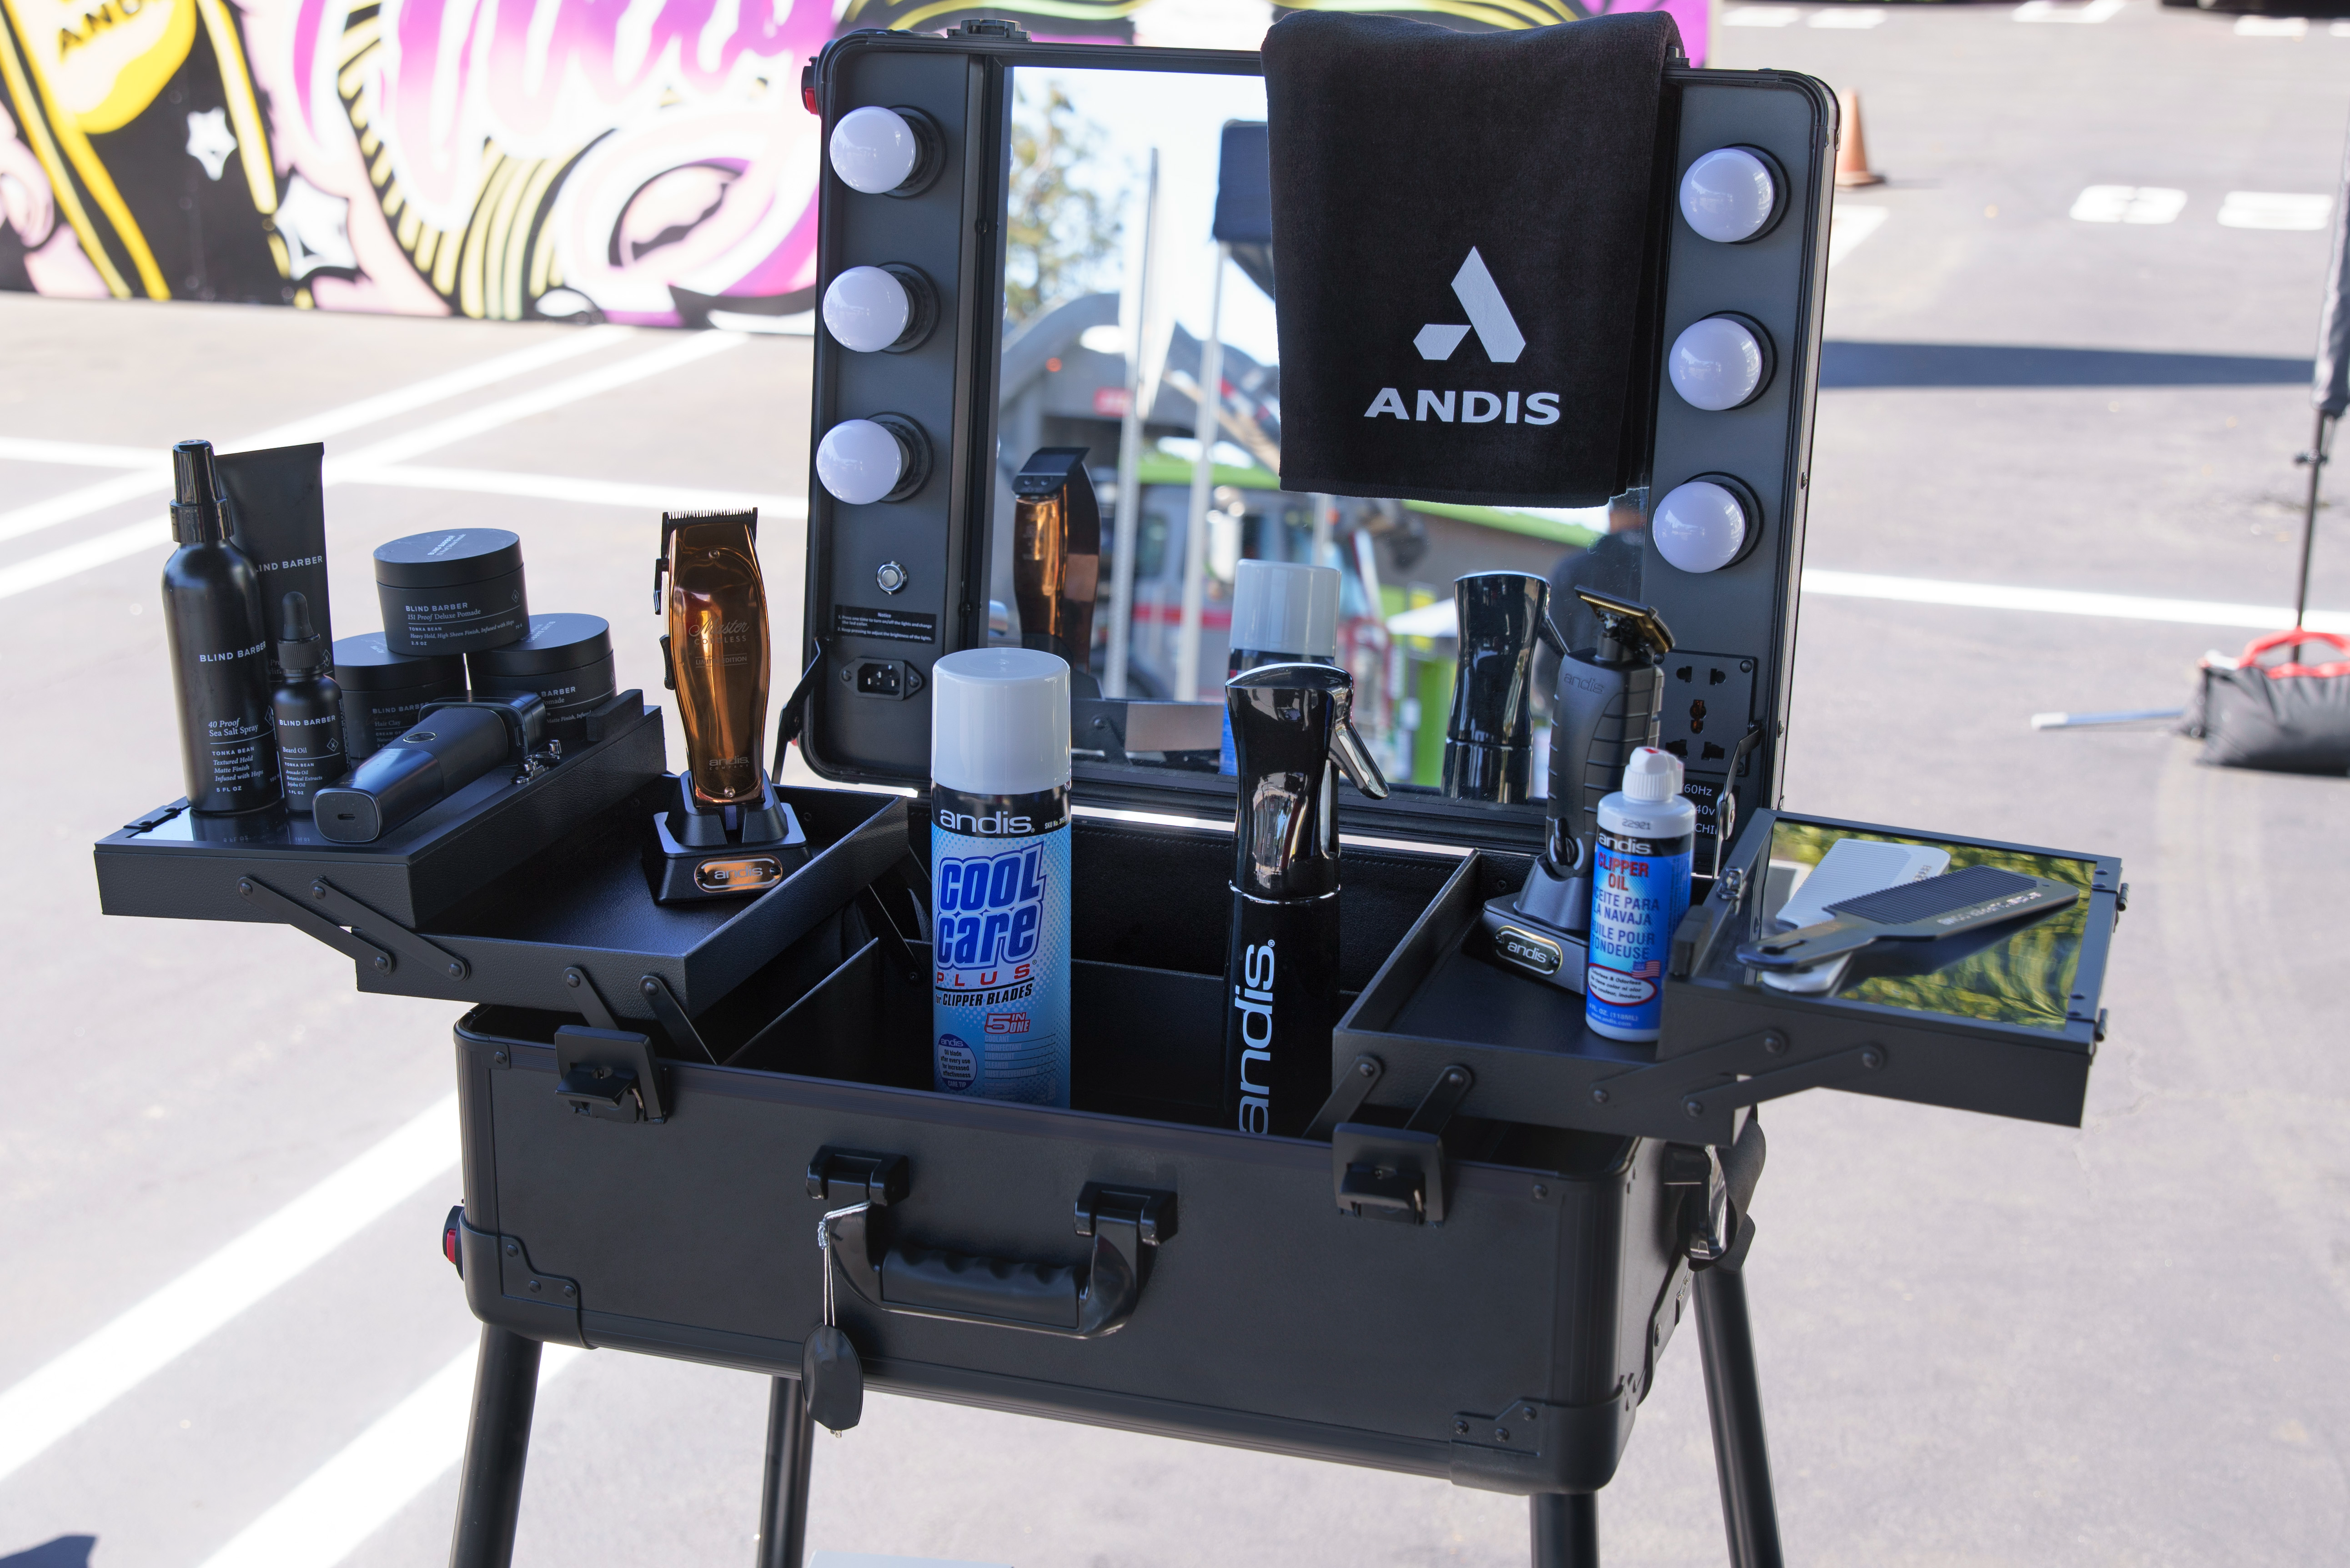 Brighter Community Venice Beach barber stand with Andis product